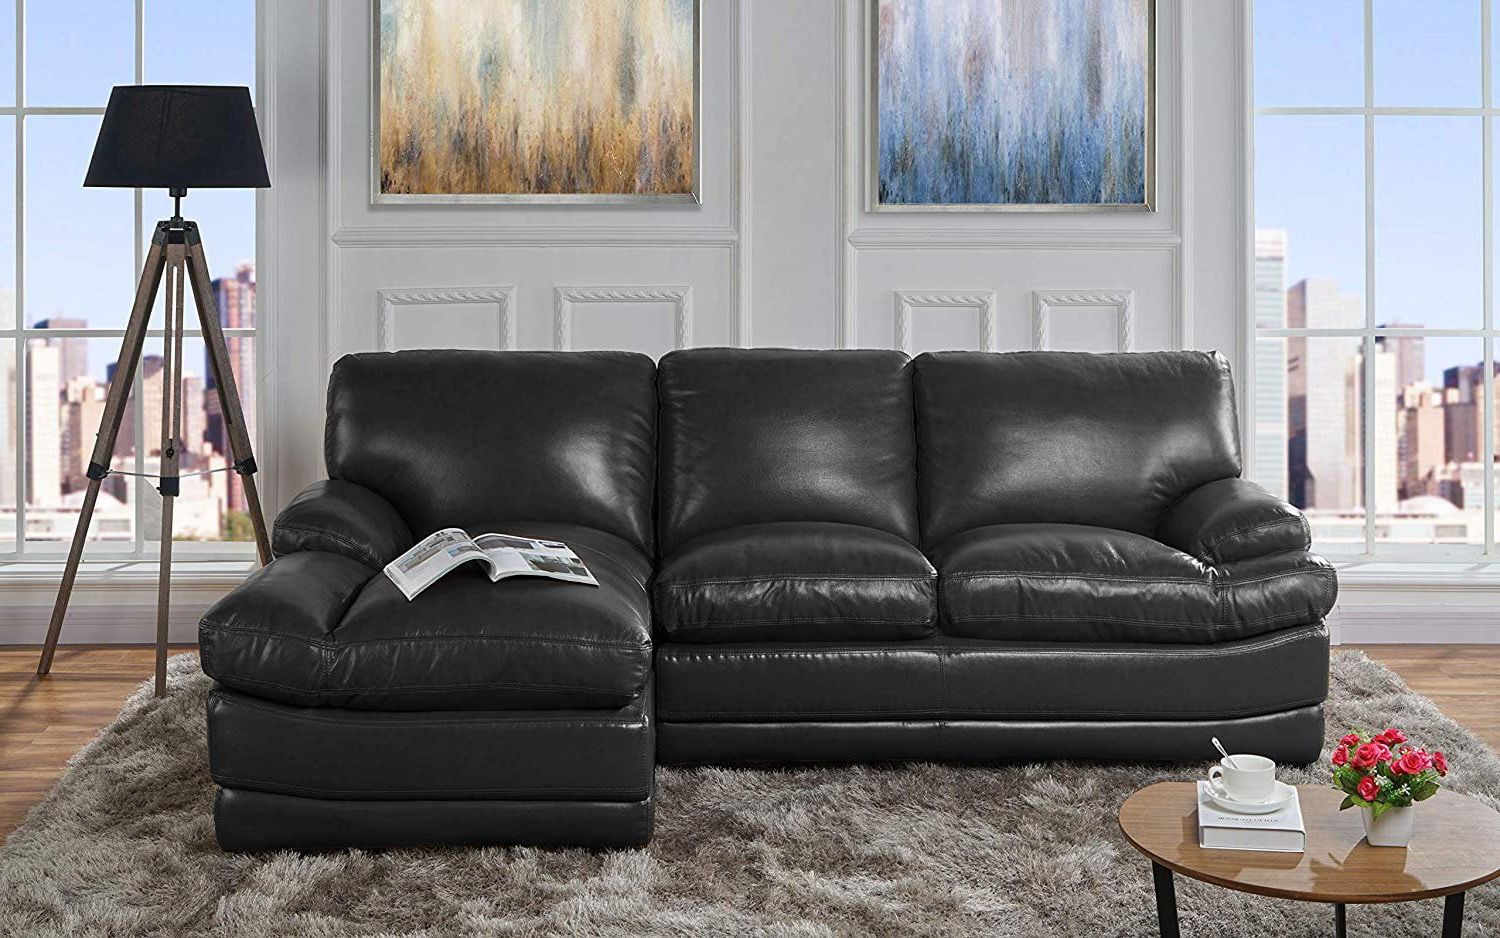 Leather Match Sectional Sofa, L Shape Couch With Chaise Lounge (right Intended For Newest 3 Seat L Shaped Sofas In Black (View 8 of 15)